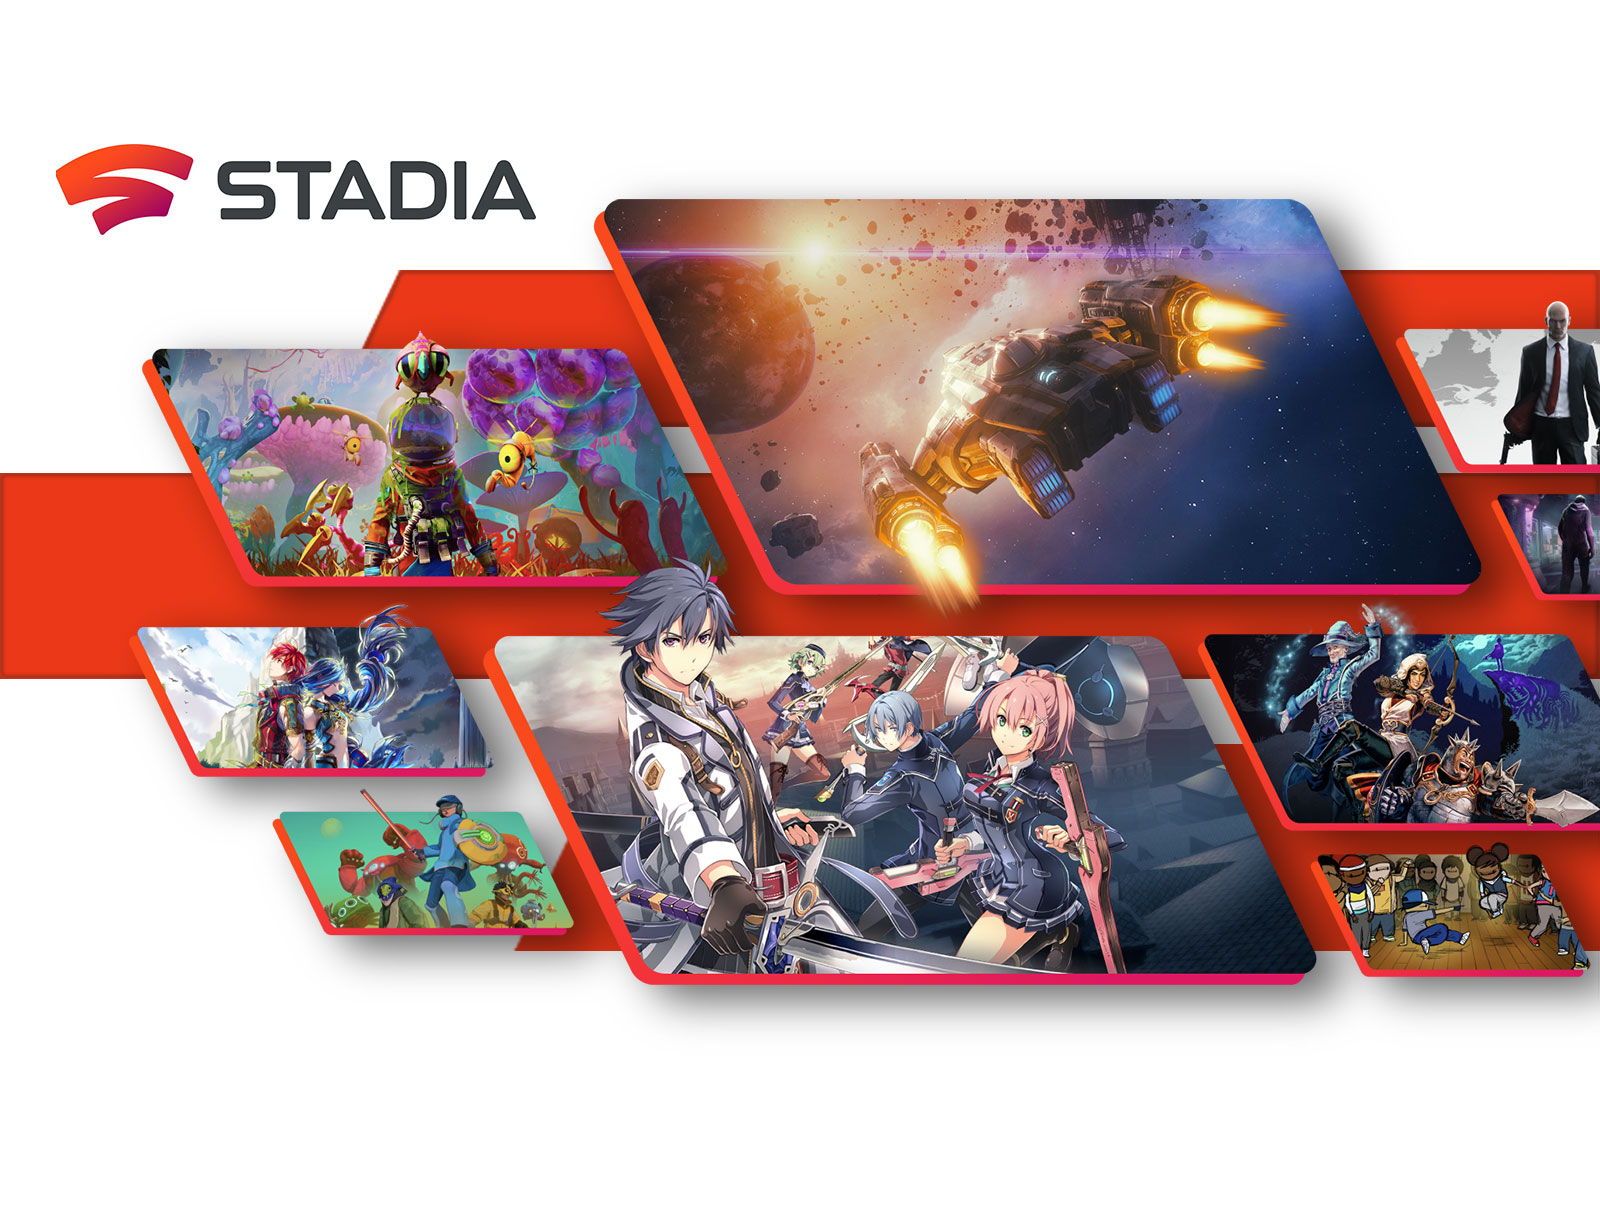 An image feautring the STADIA logo and picture inserts of scenes and characters from several video games. 